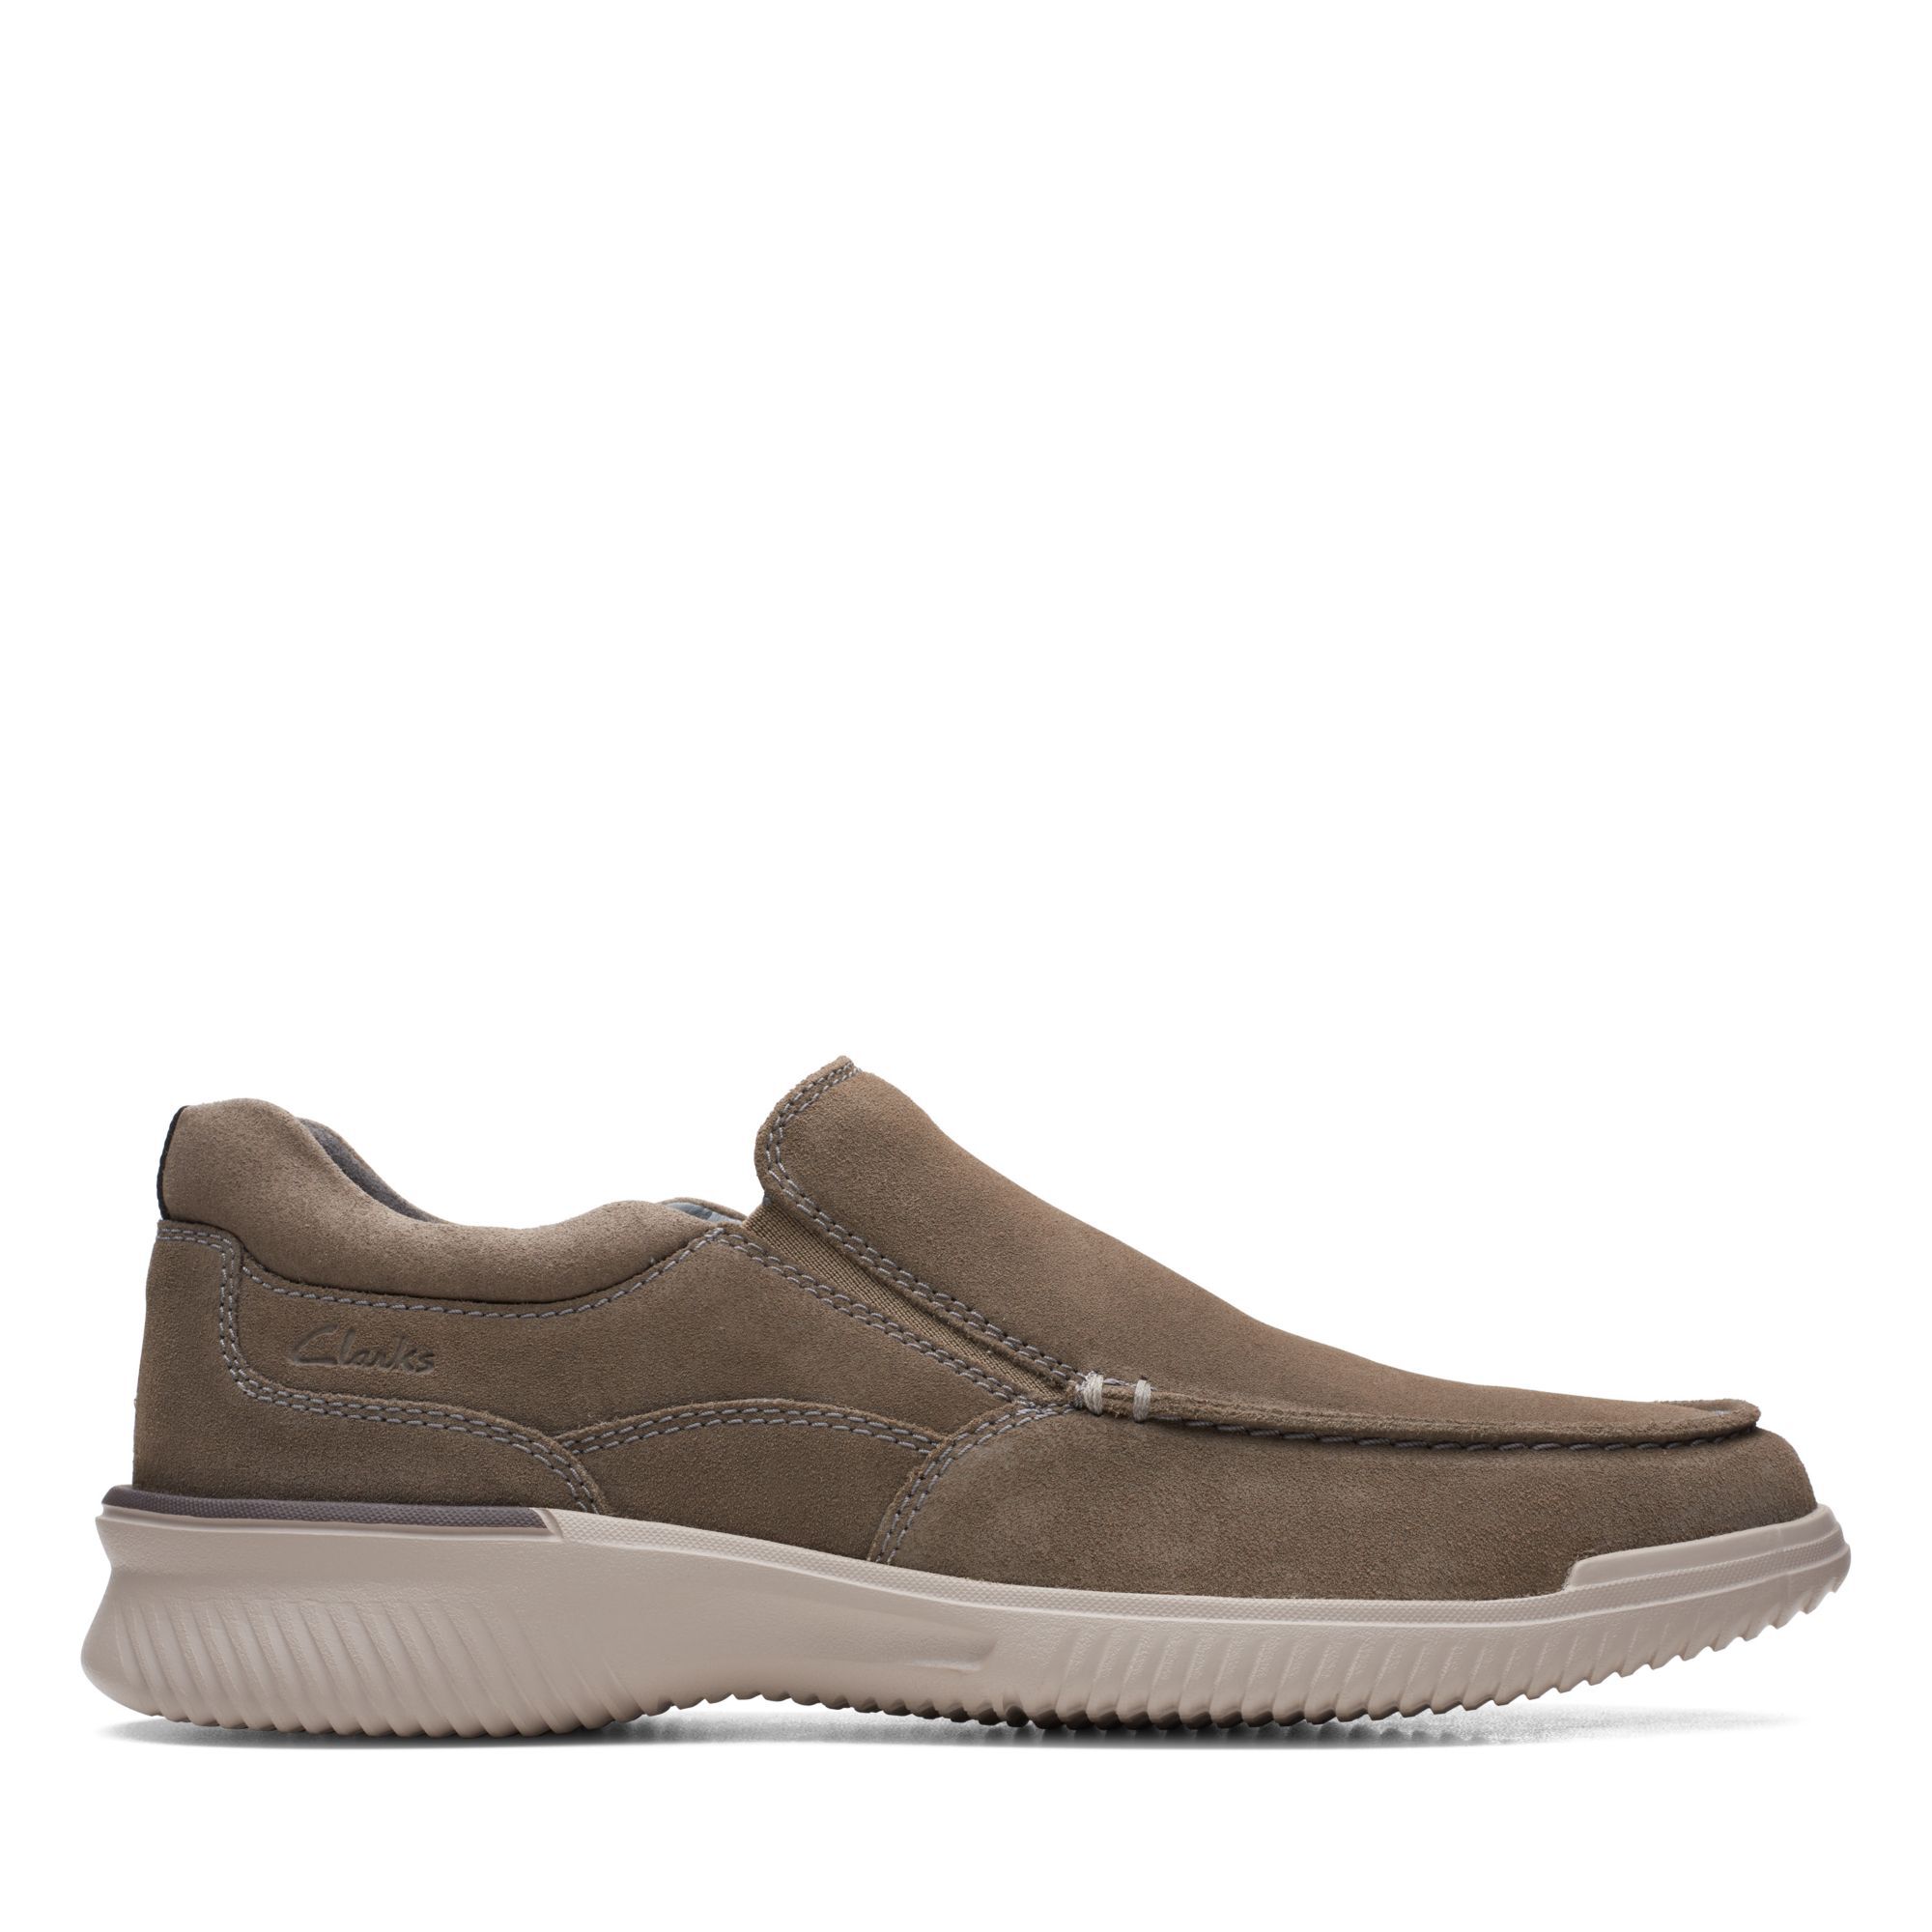 Clarks Donaway Free - Stone suede leather